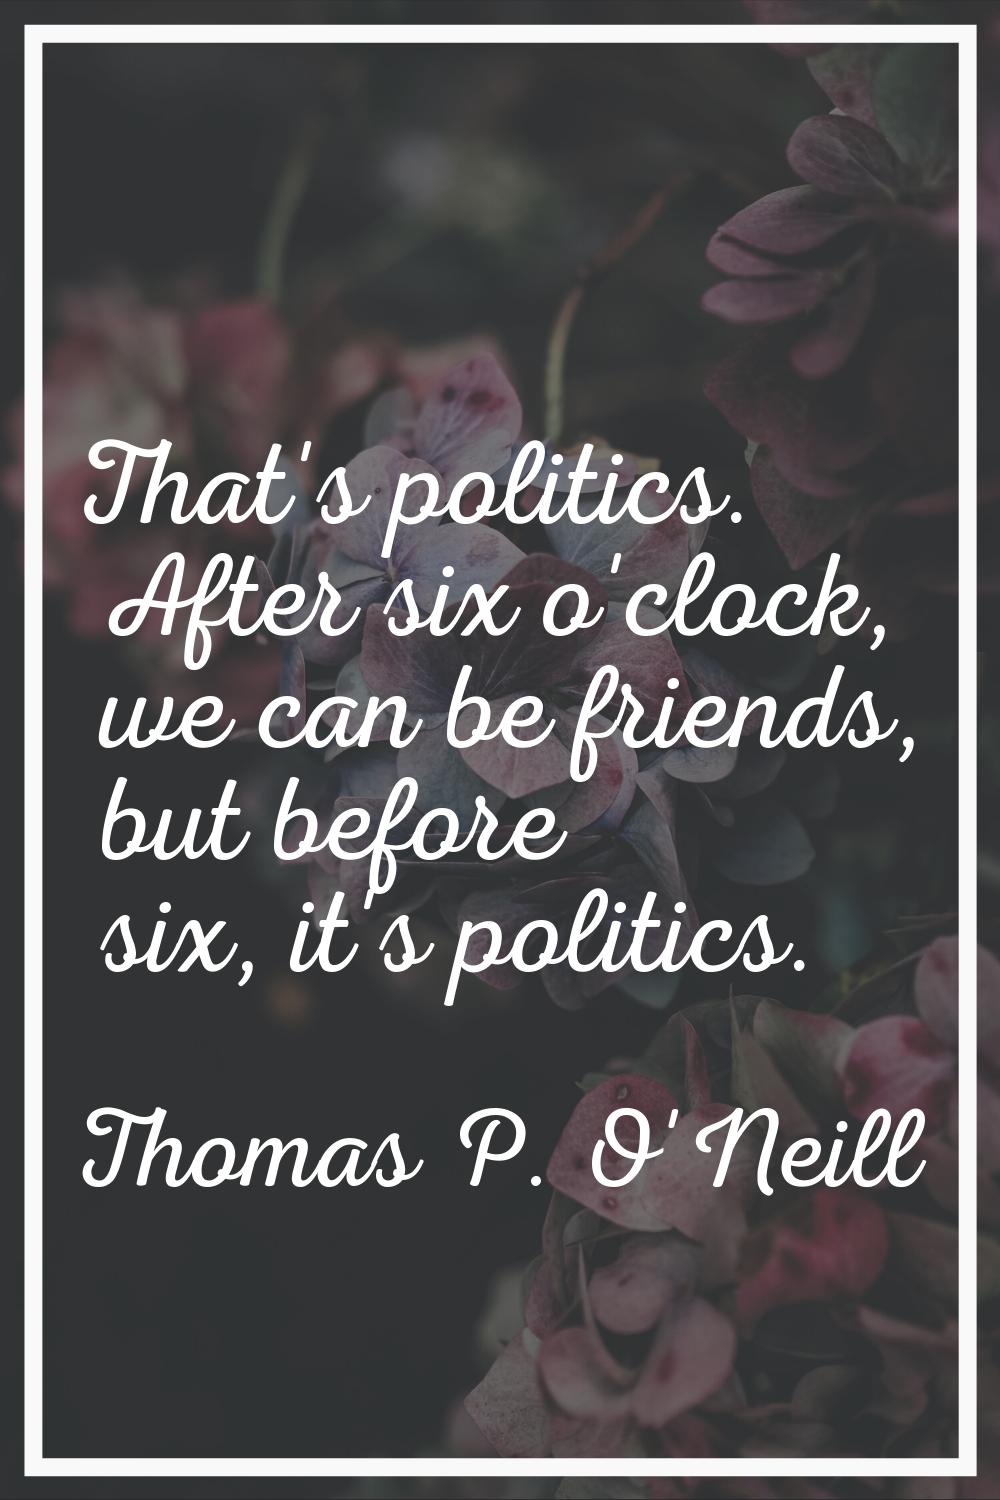 That's politics. After six o'clock, we can be friends, but before six, it's politics.